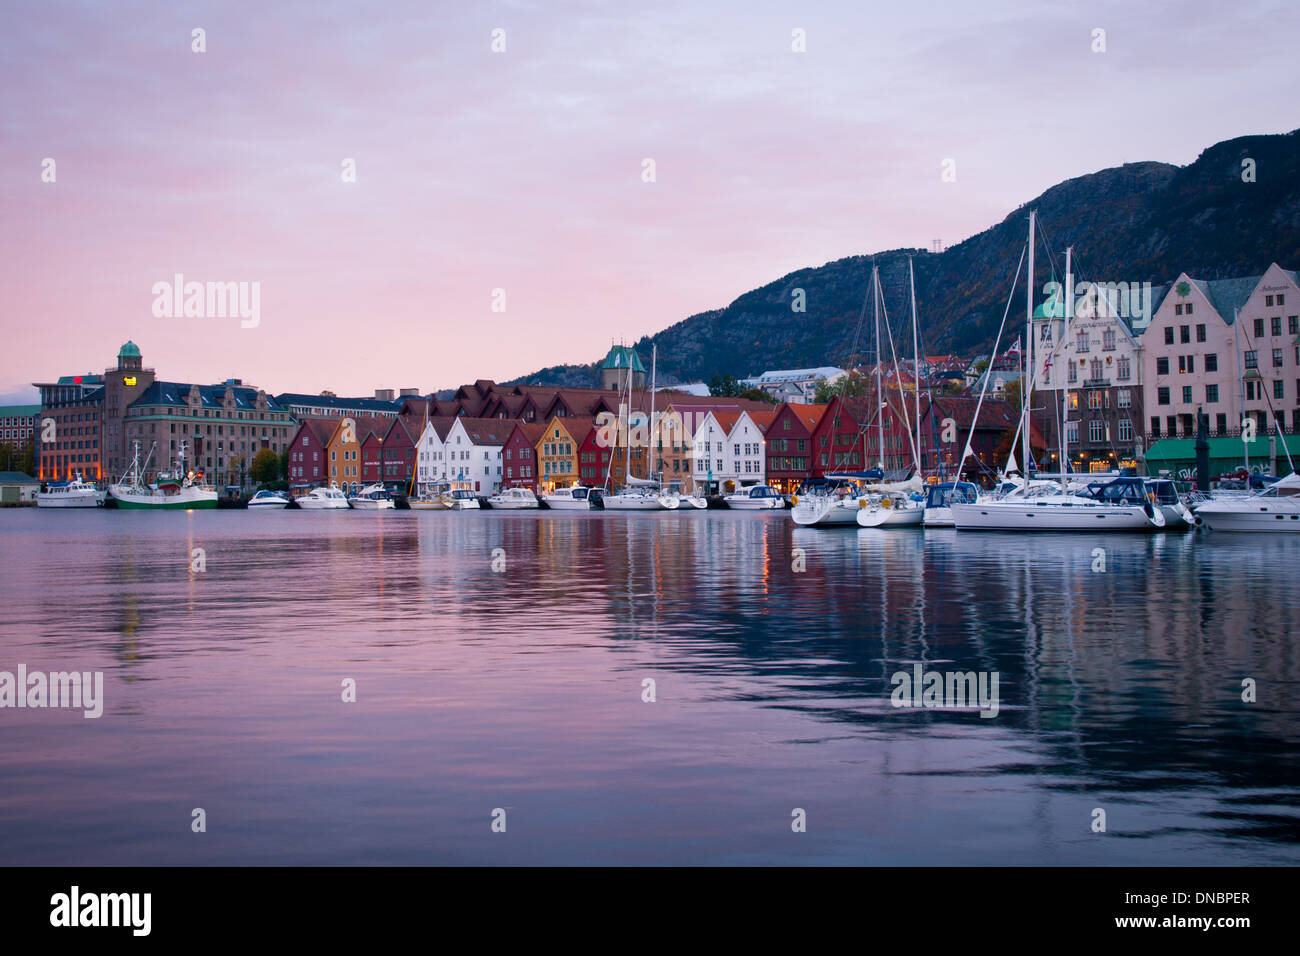 A view of Bryggen and Vågen in beautiful Bergen, Norway, at sunrise. Stock Photo